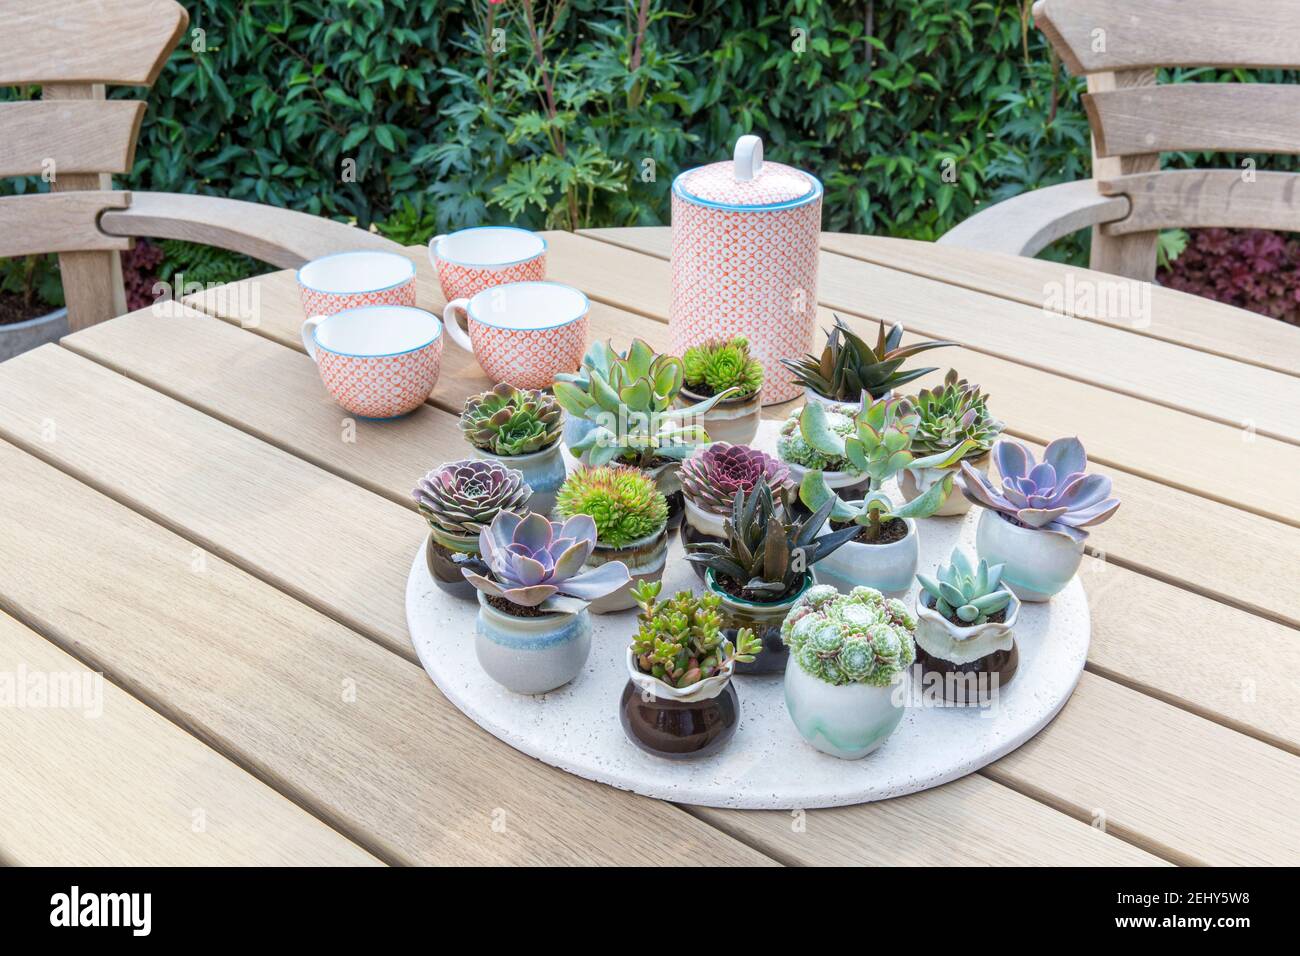 Outdoor dining area with hardwood garden furniture table with a display of succulents plants in miniature ceramic pots in garden England UK GB Stock Photo